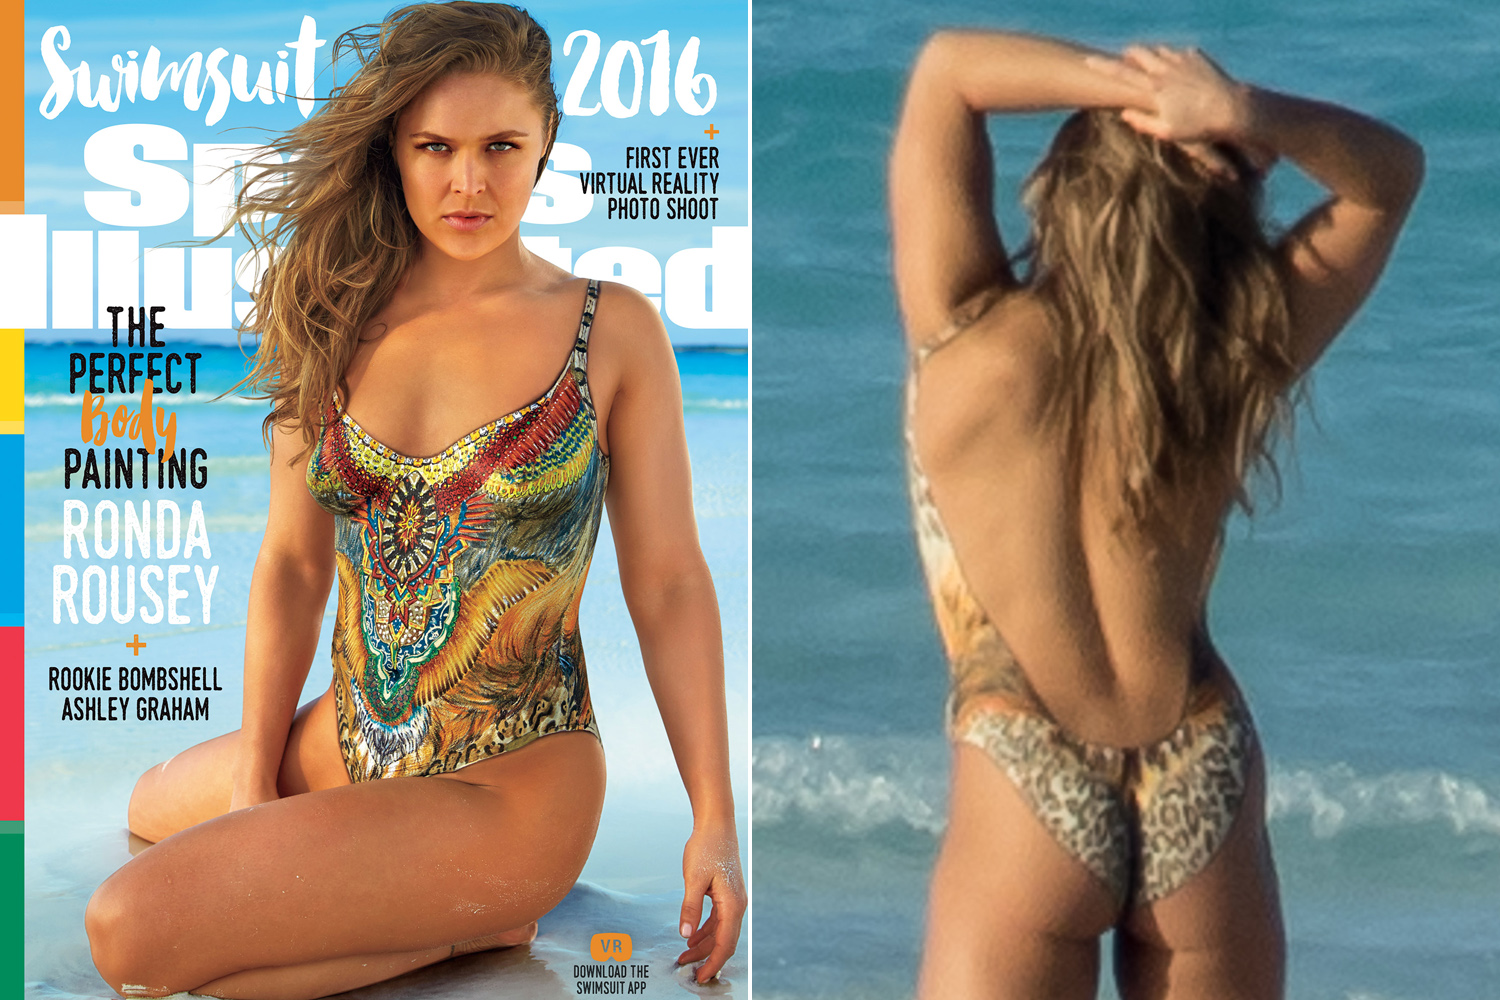 andrea kellogg recommends is ronda rousey hot pic